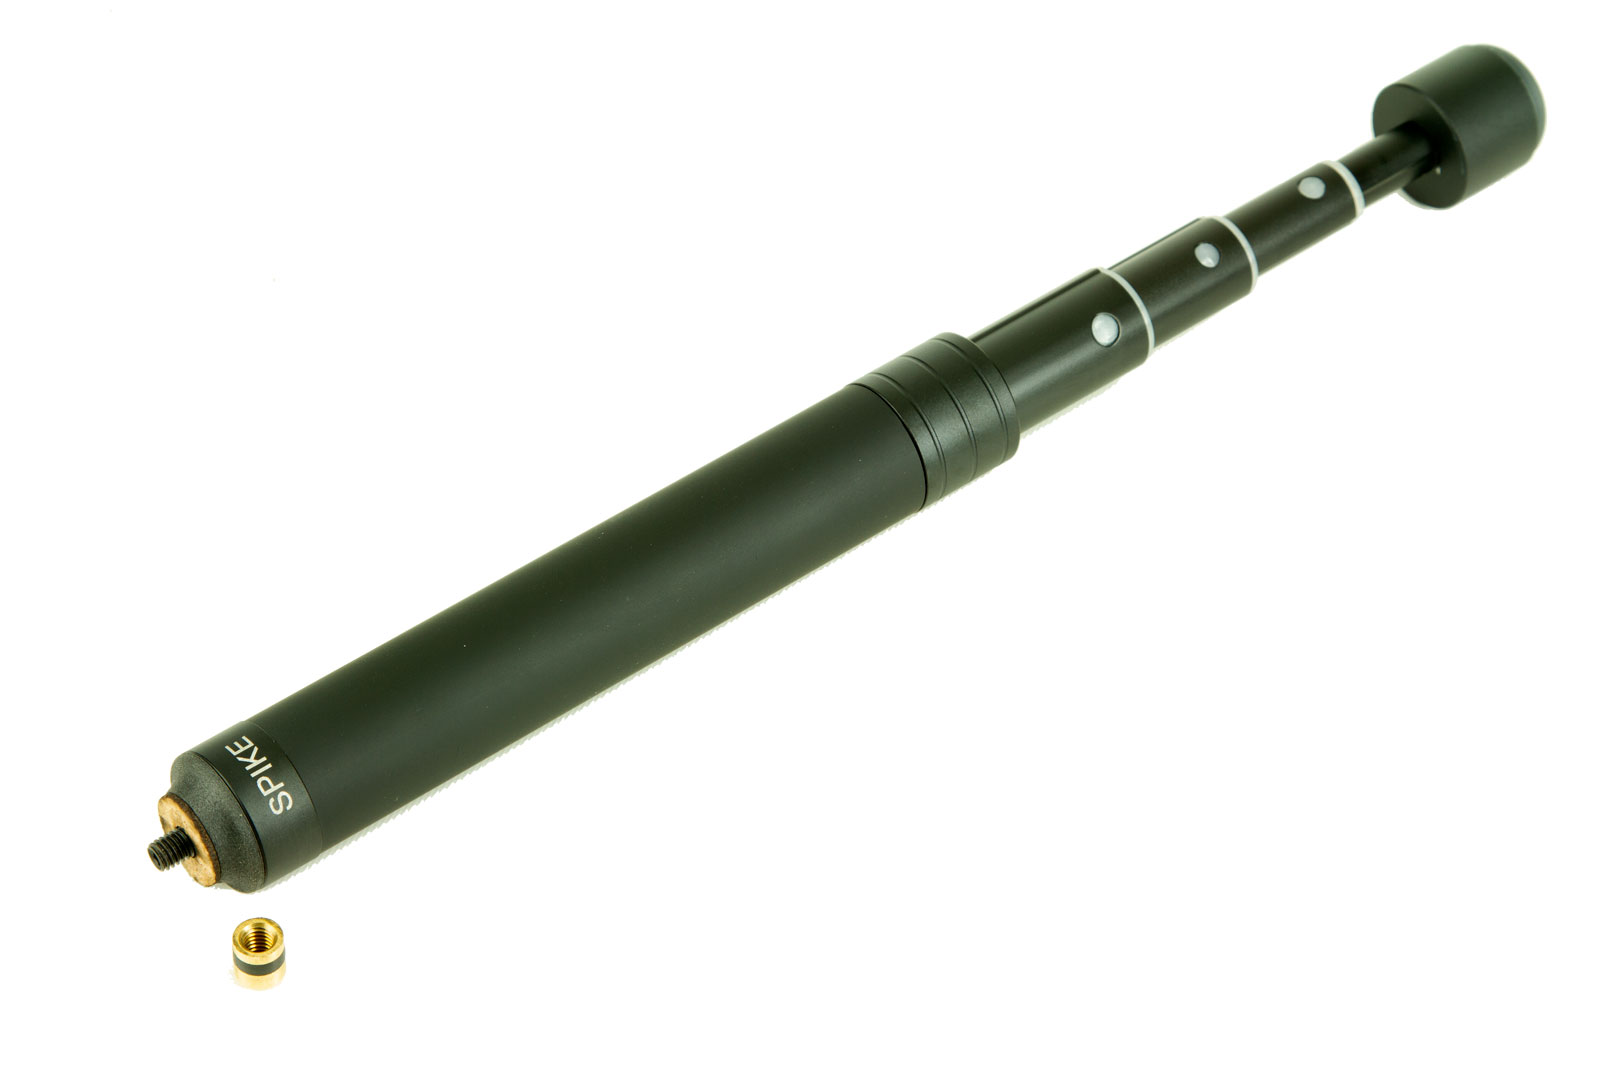 Tekeskop spindle leg with M6 thread. Suitable for Huber F-bass recorders.